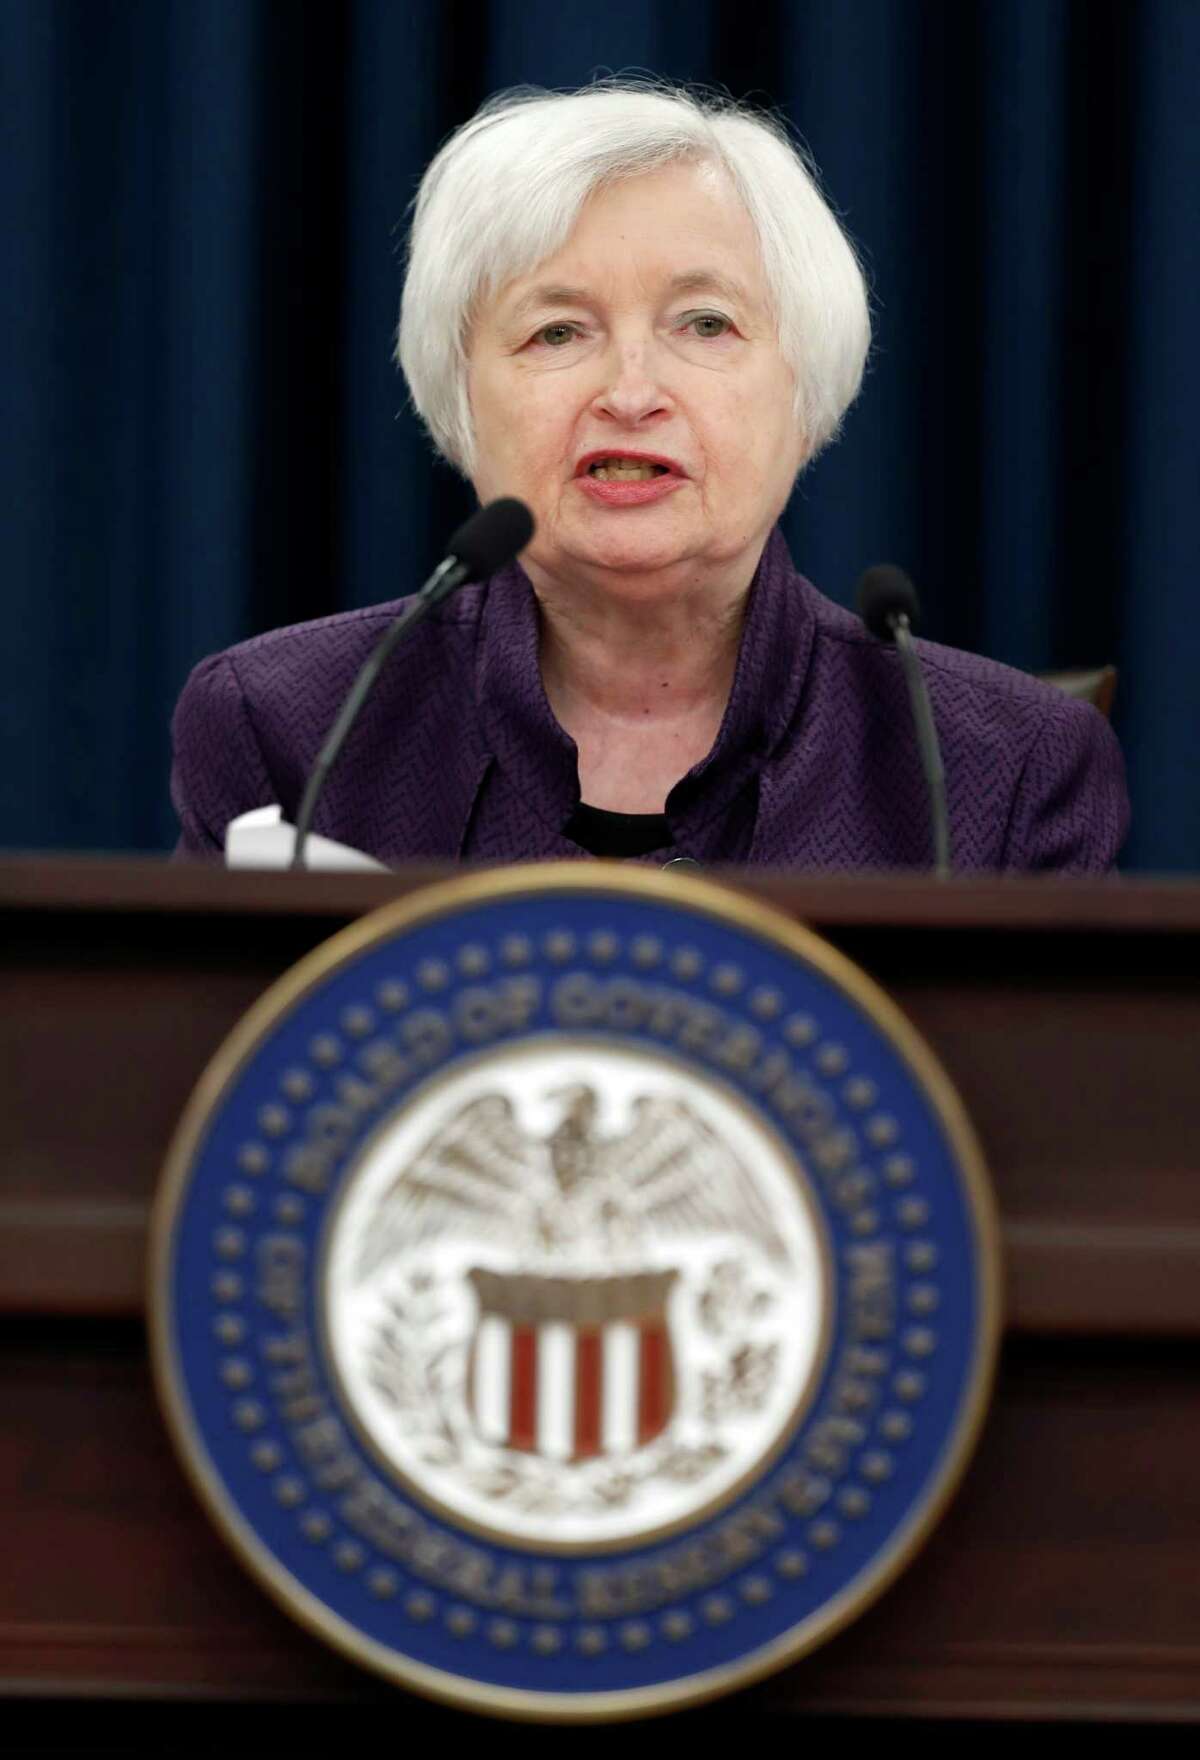 Federal Reserve Board Chair Janet Yellen speaks during a news conference on the Federal Reserve's monetary policy, Wednesday, Sept. 21, 2016, in Washington. (AP Photo/Alex Brandon)